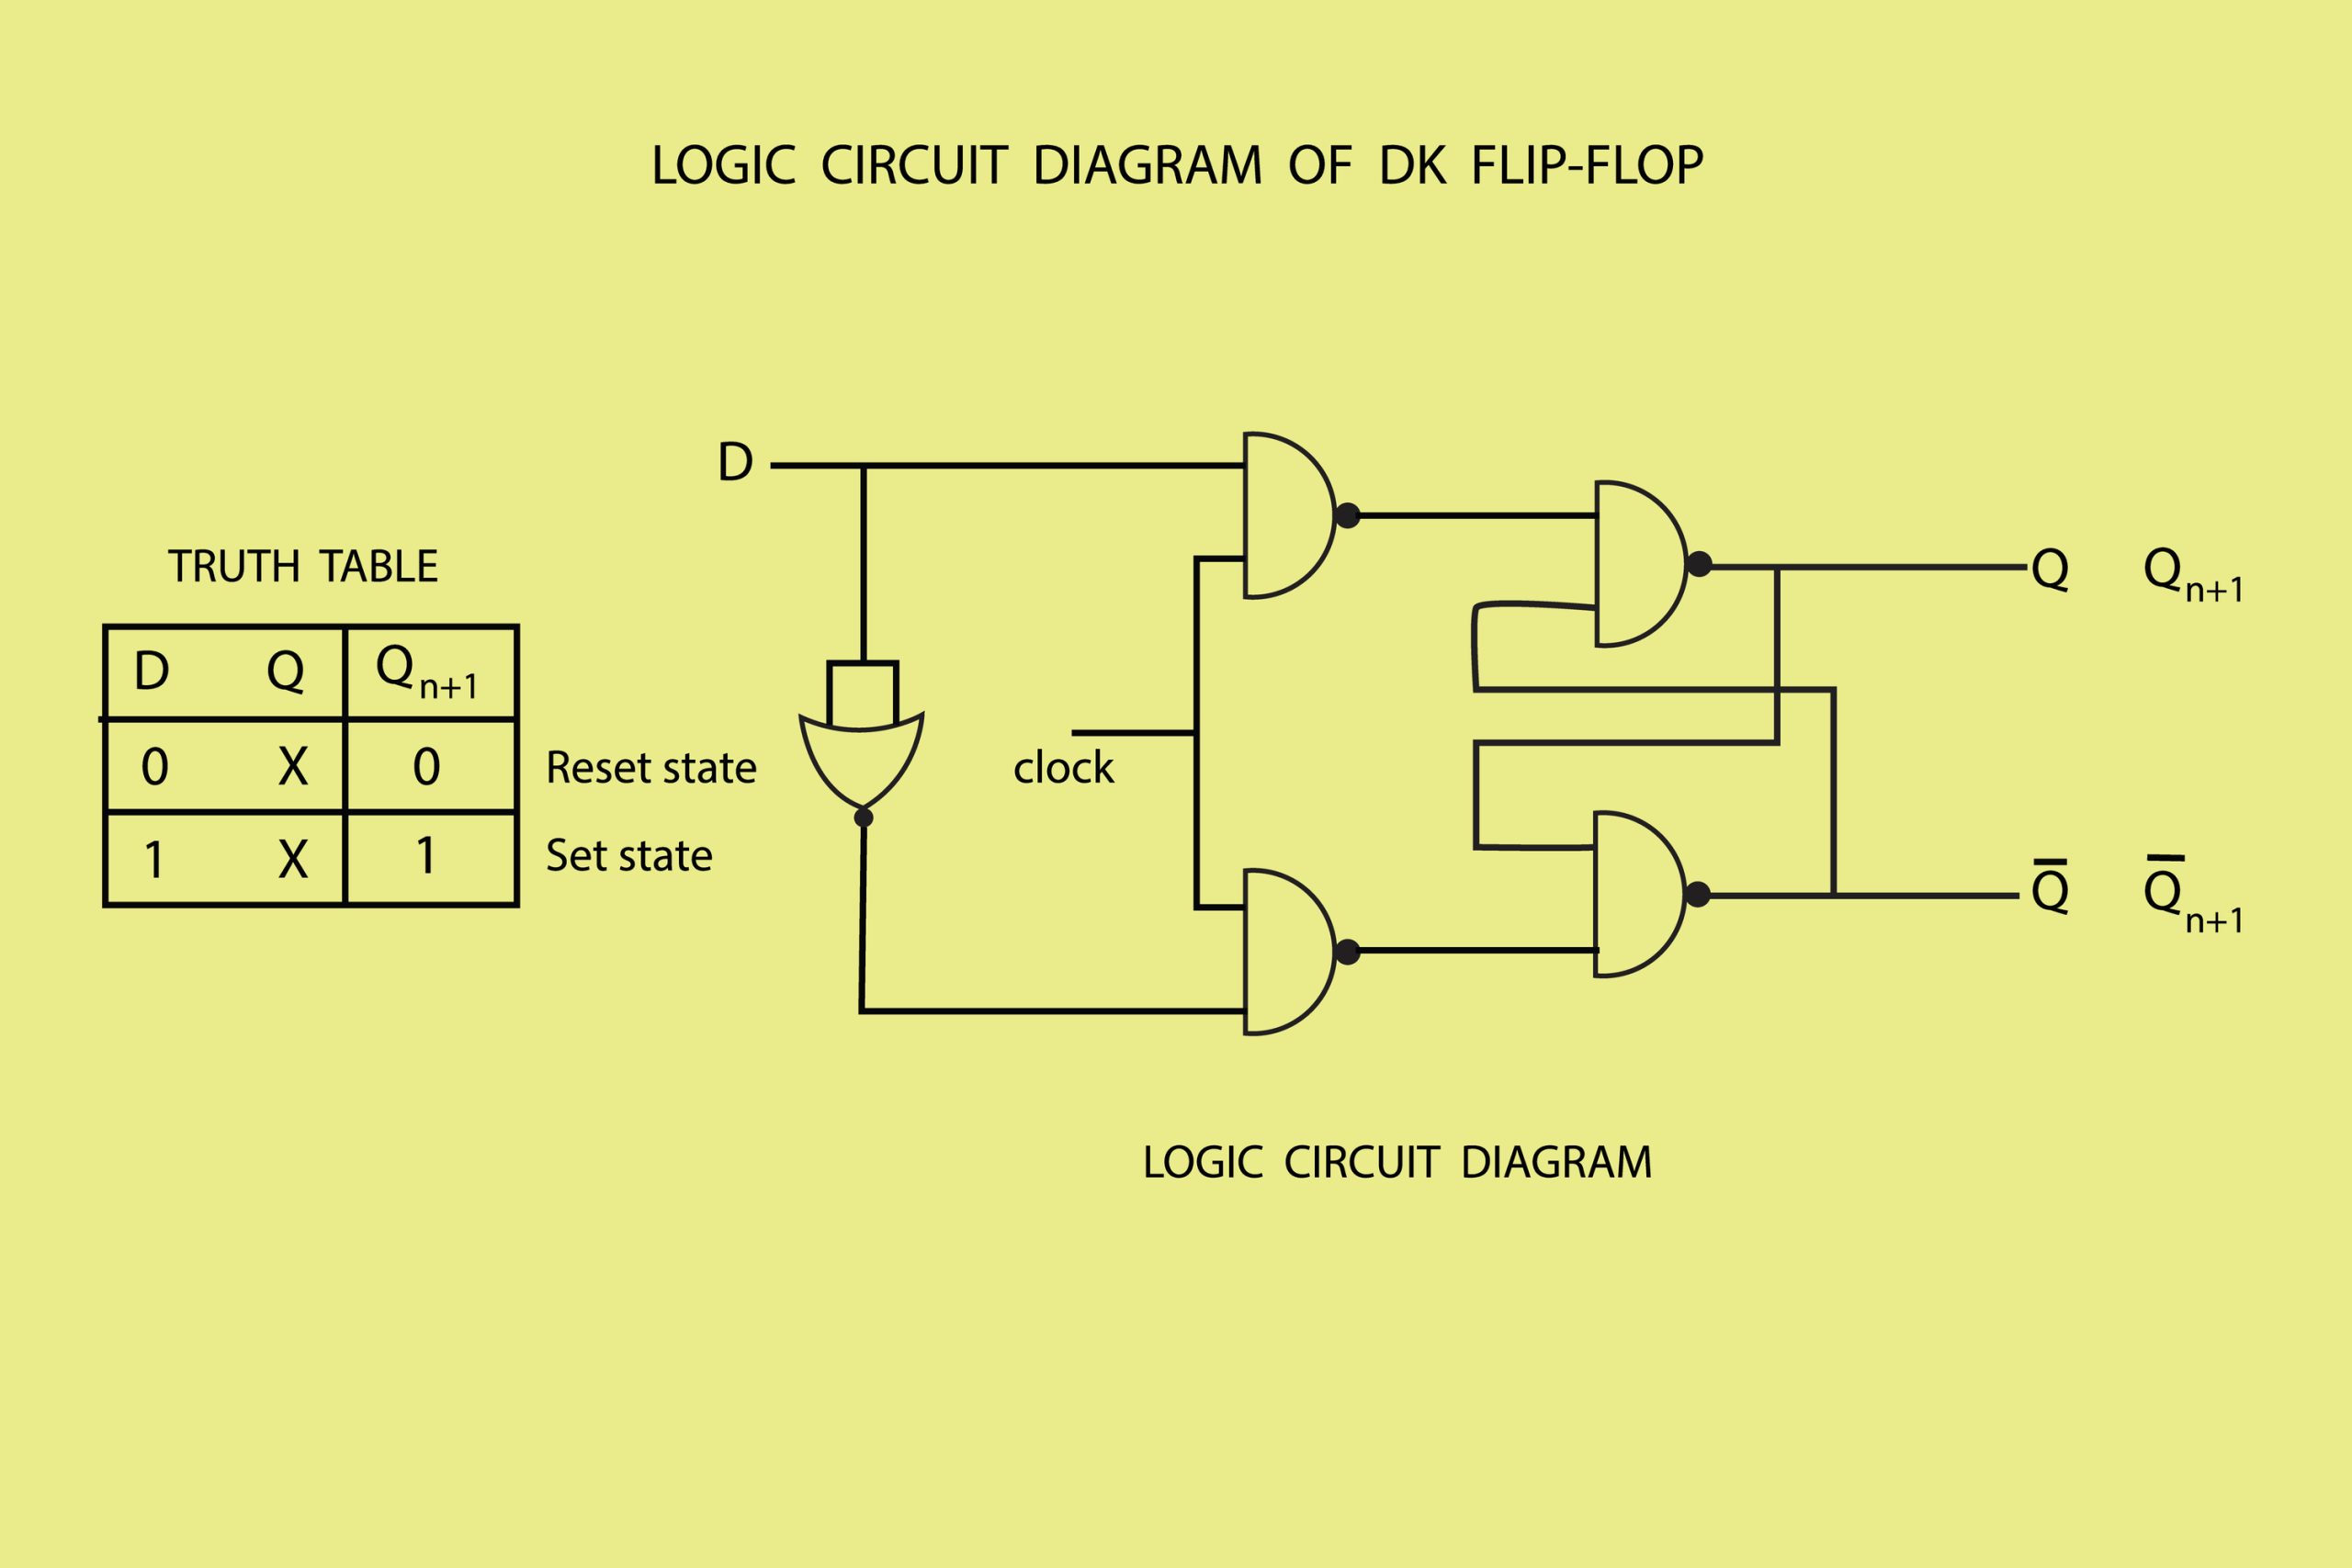 A flip-flop logic circuit diagram and truth table